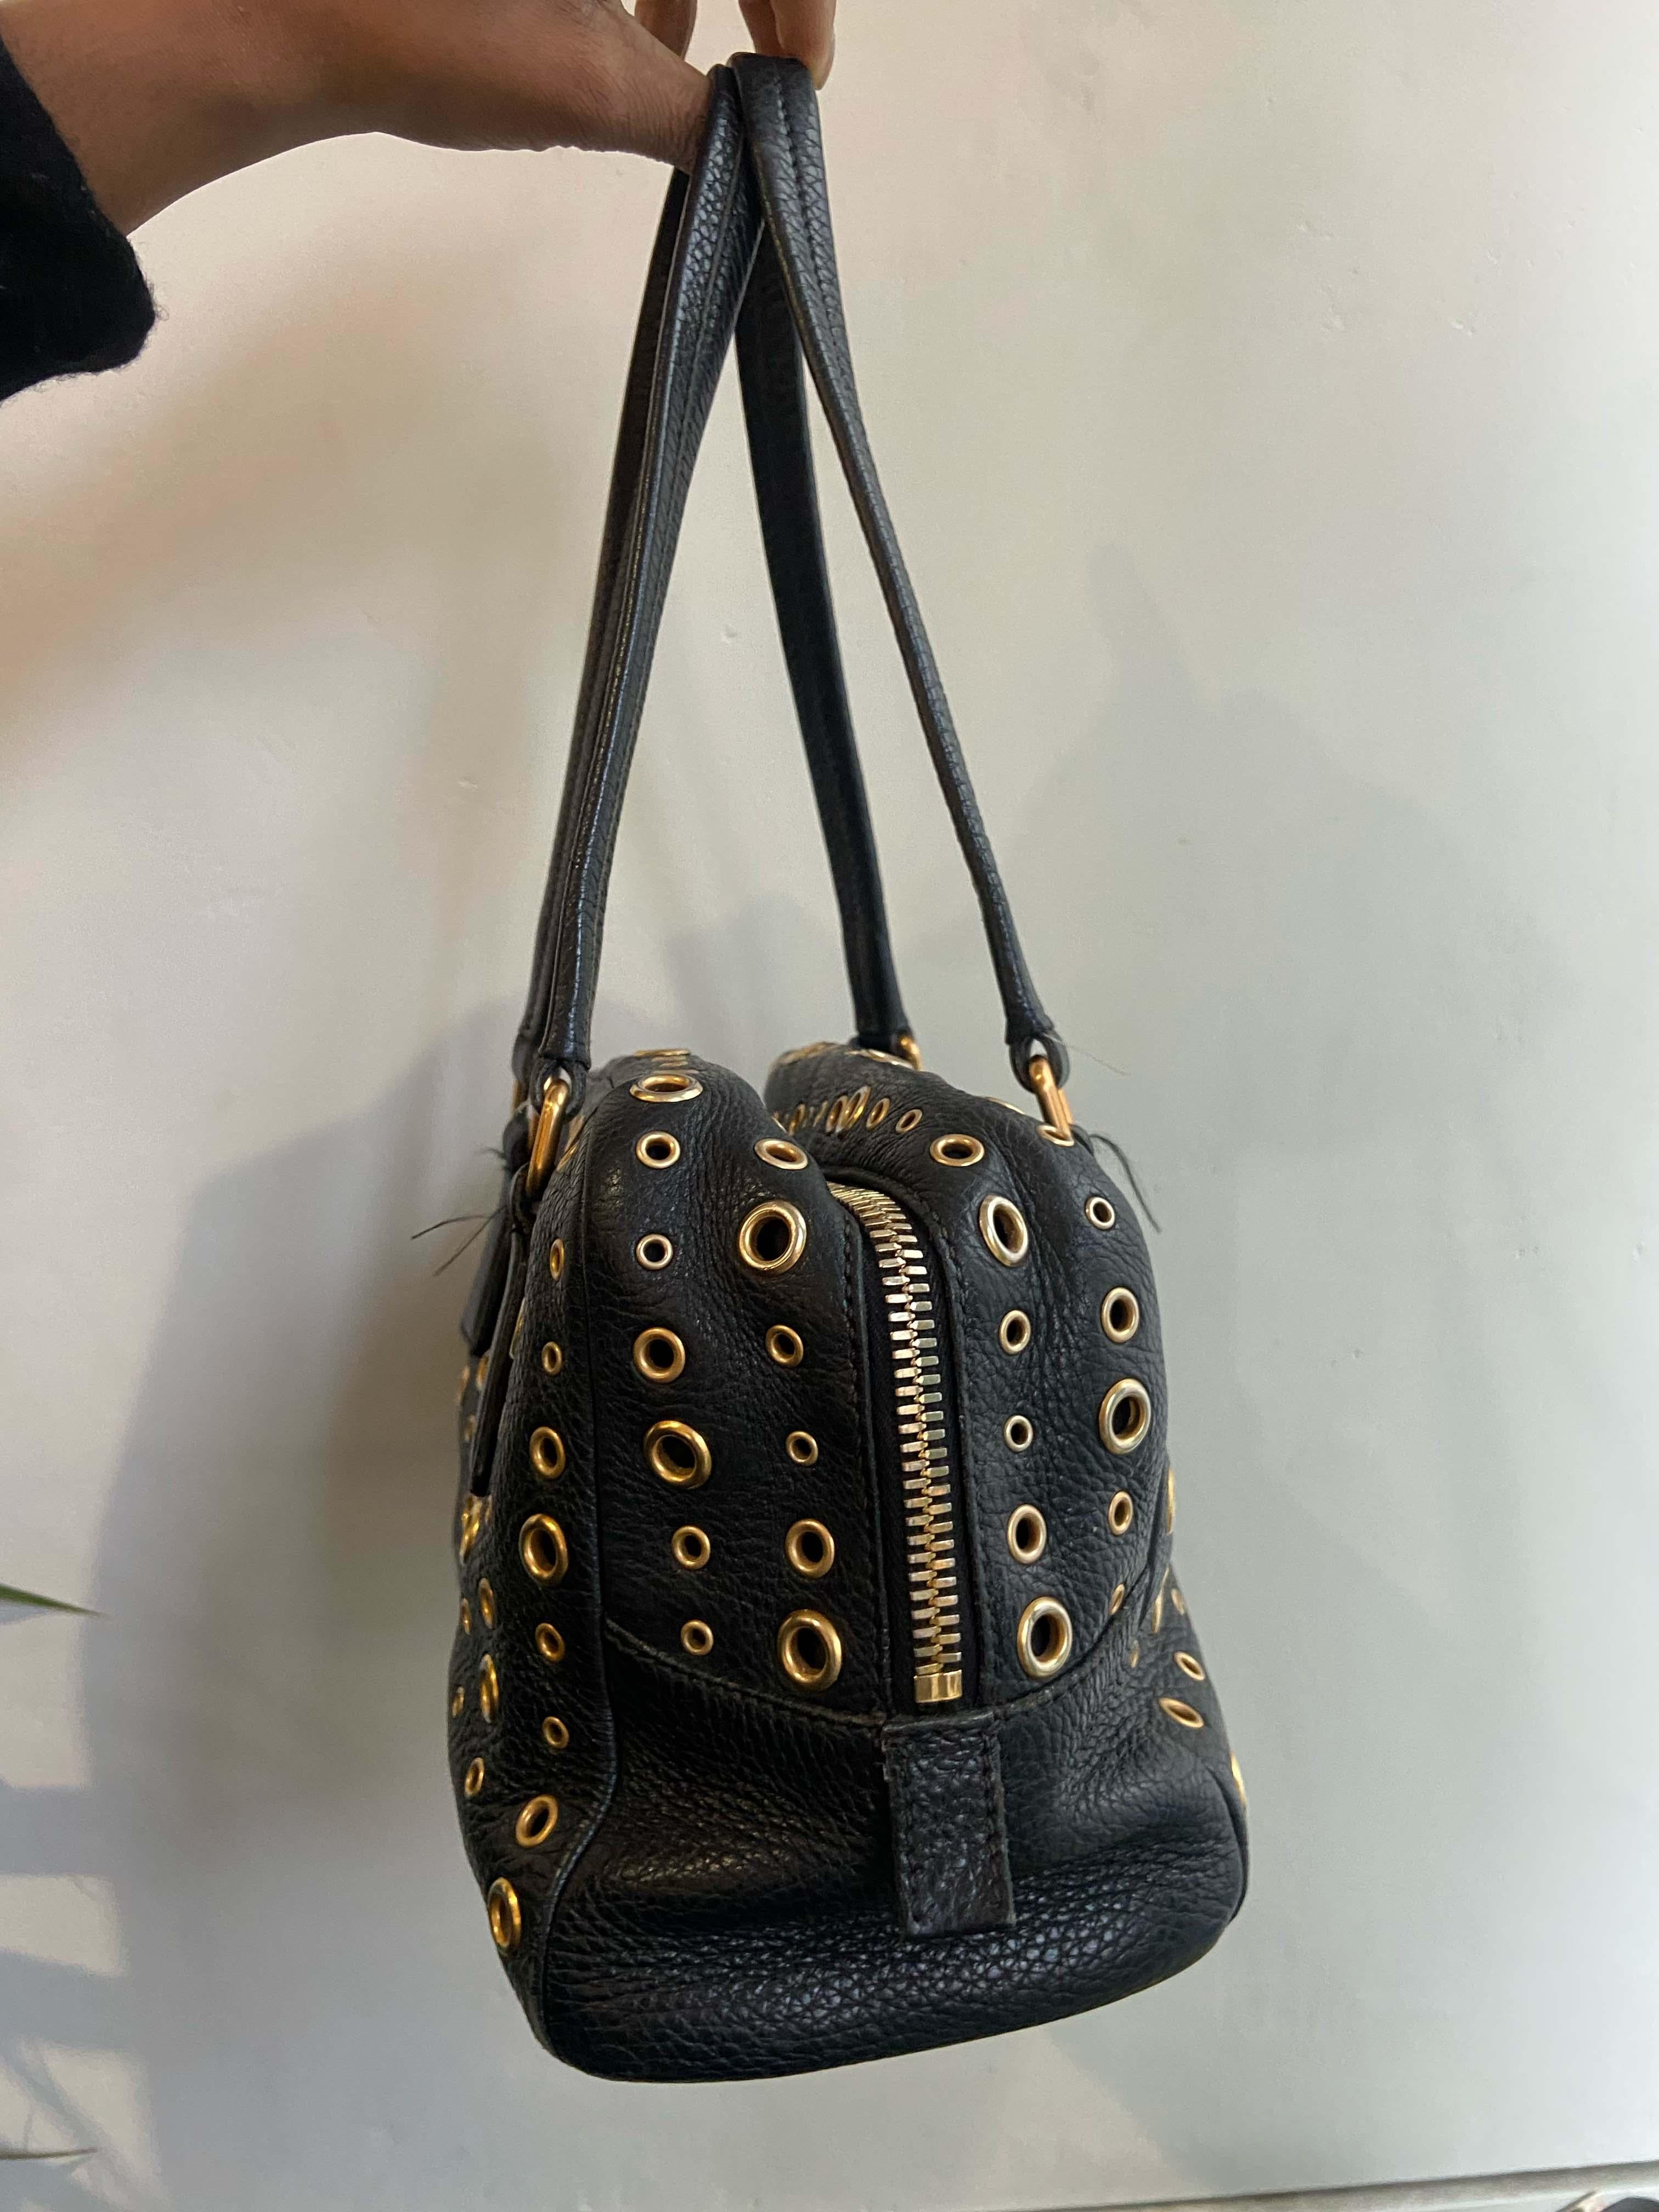 Vintage 2000's Grommet Bauletto Bag  In Excellent Condition For Sale In London, GB